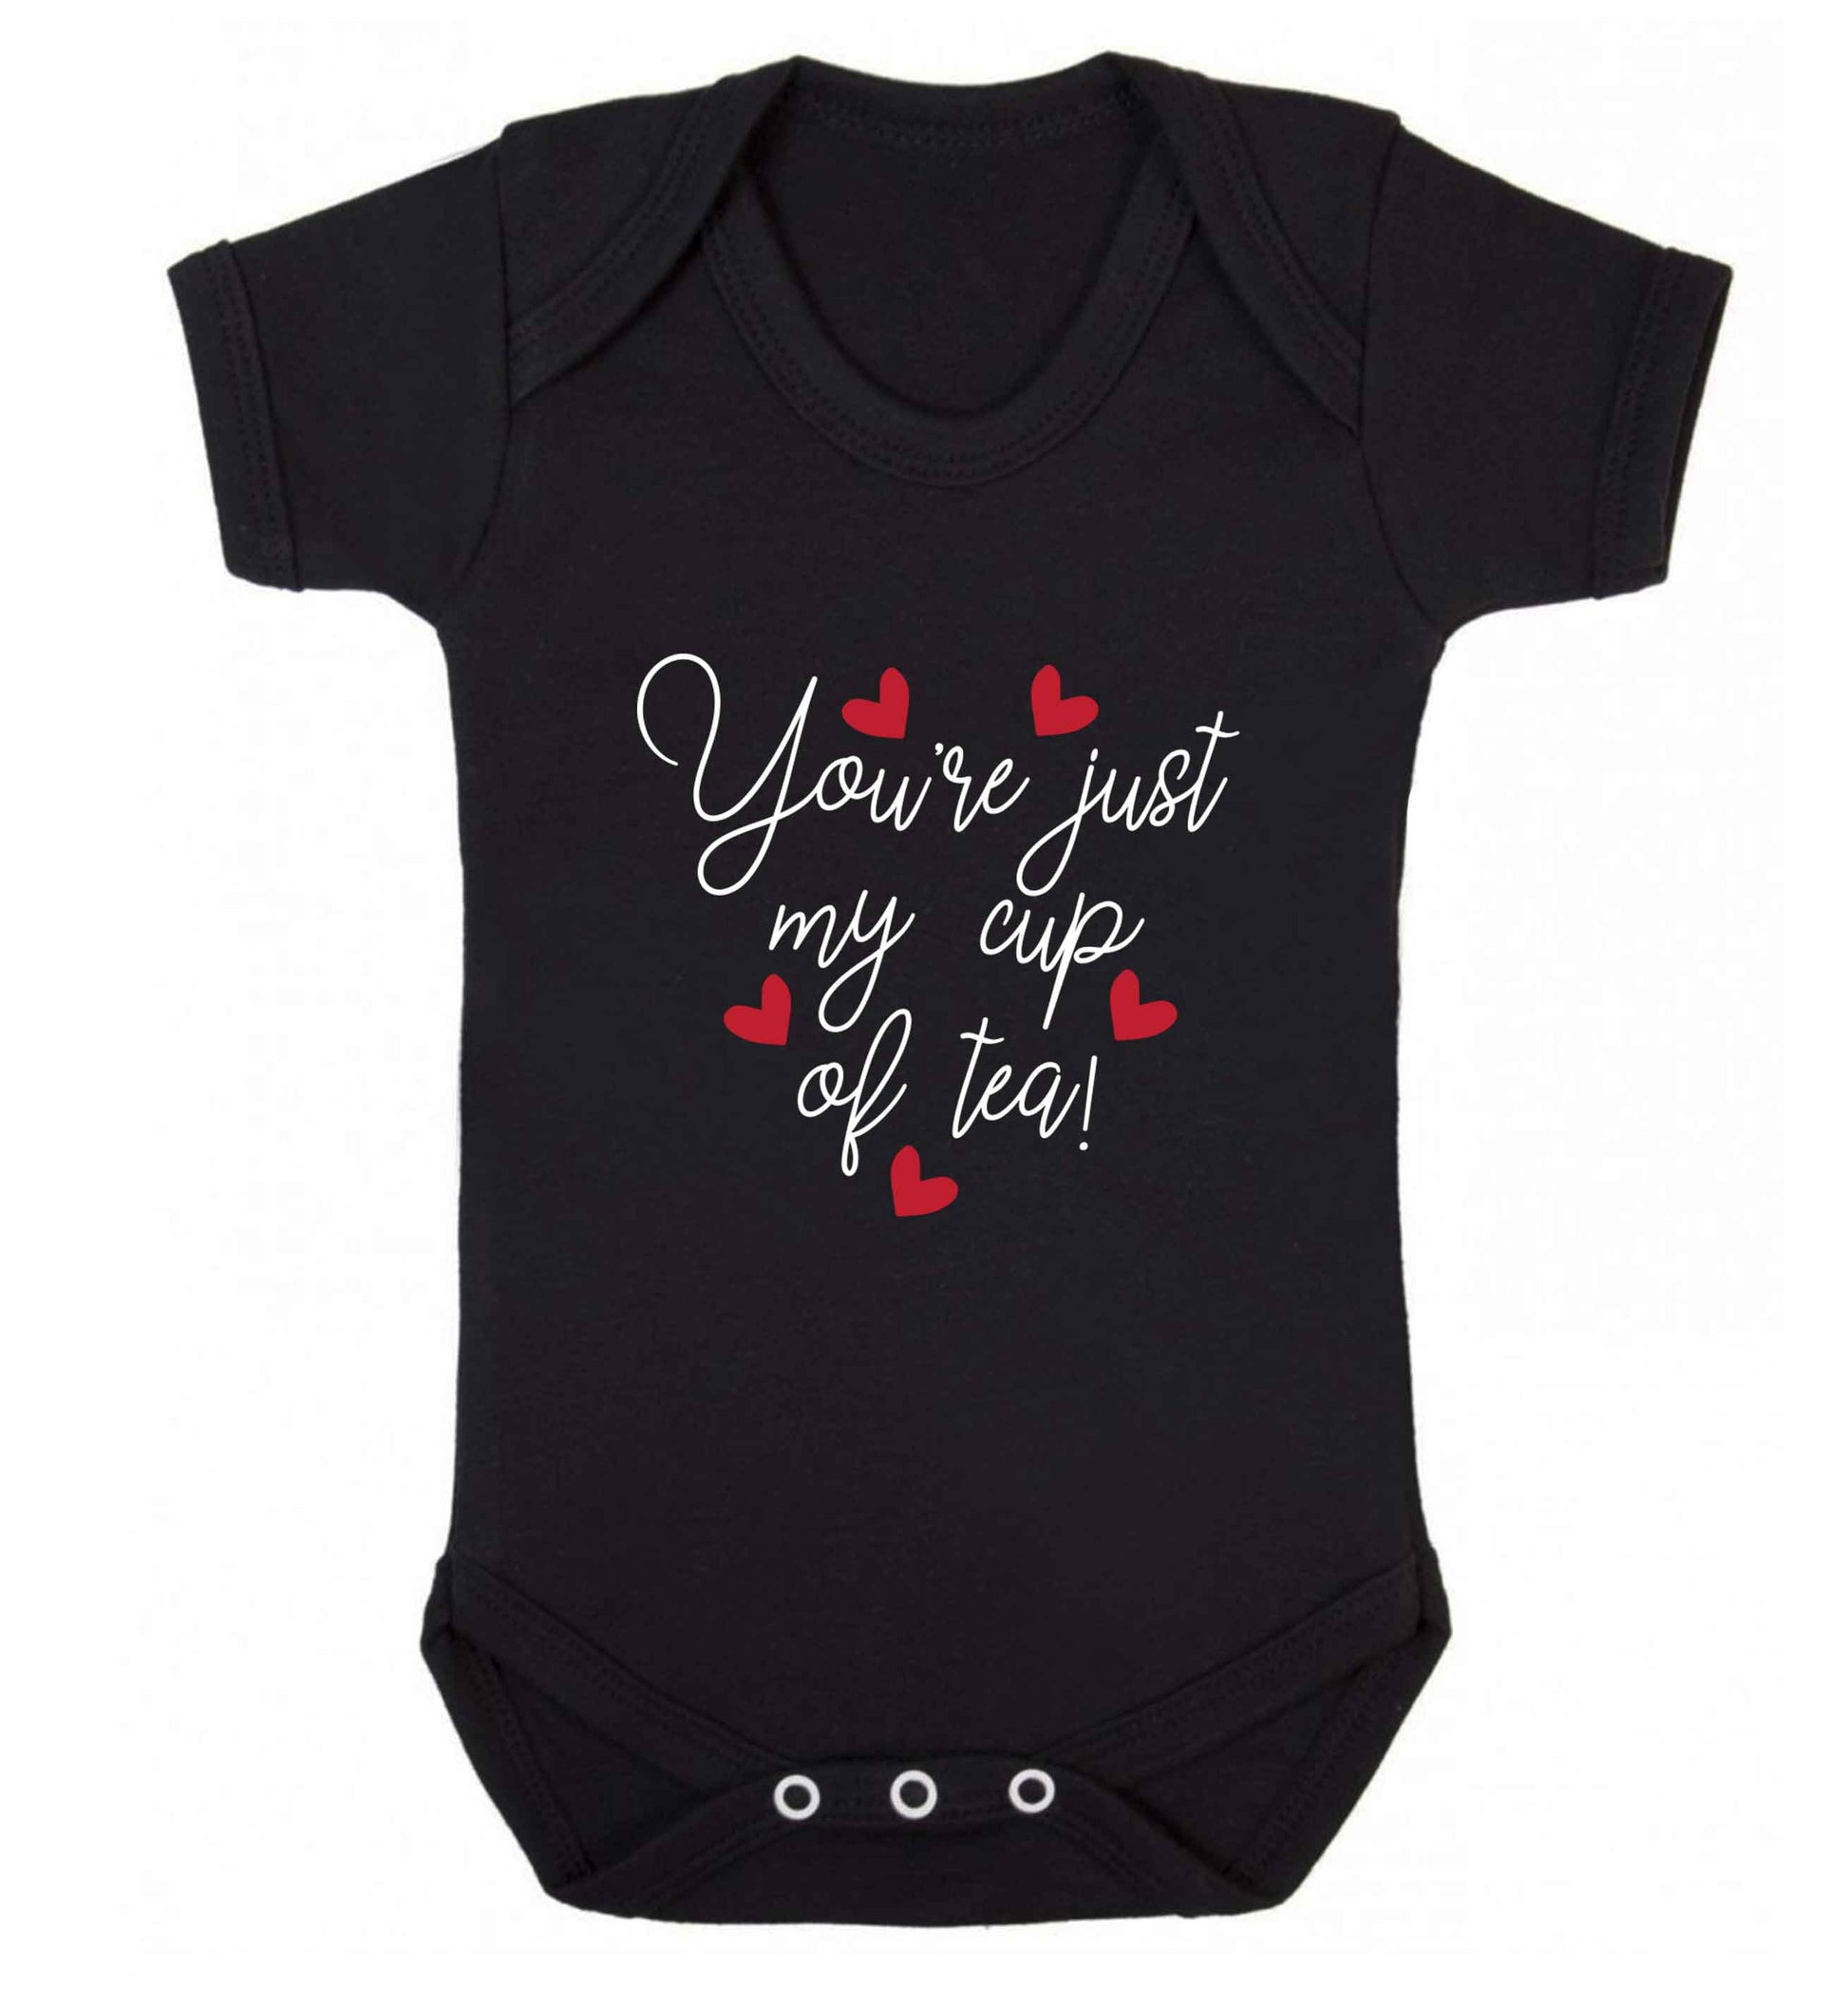 You're just my cup of tea baby vest black 18-24 months